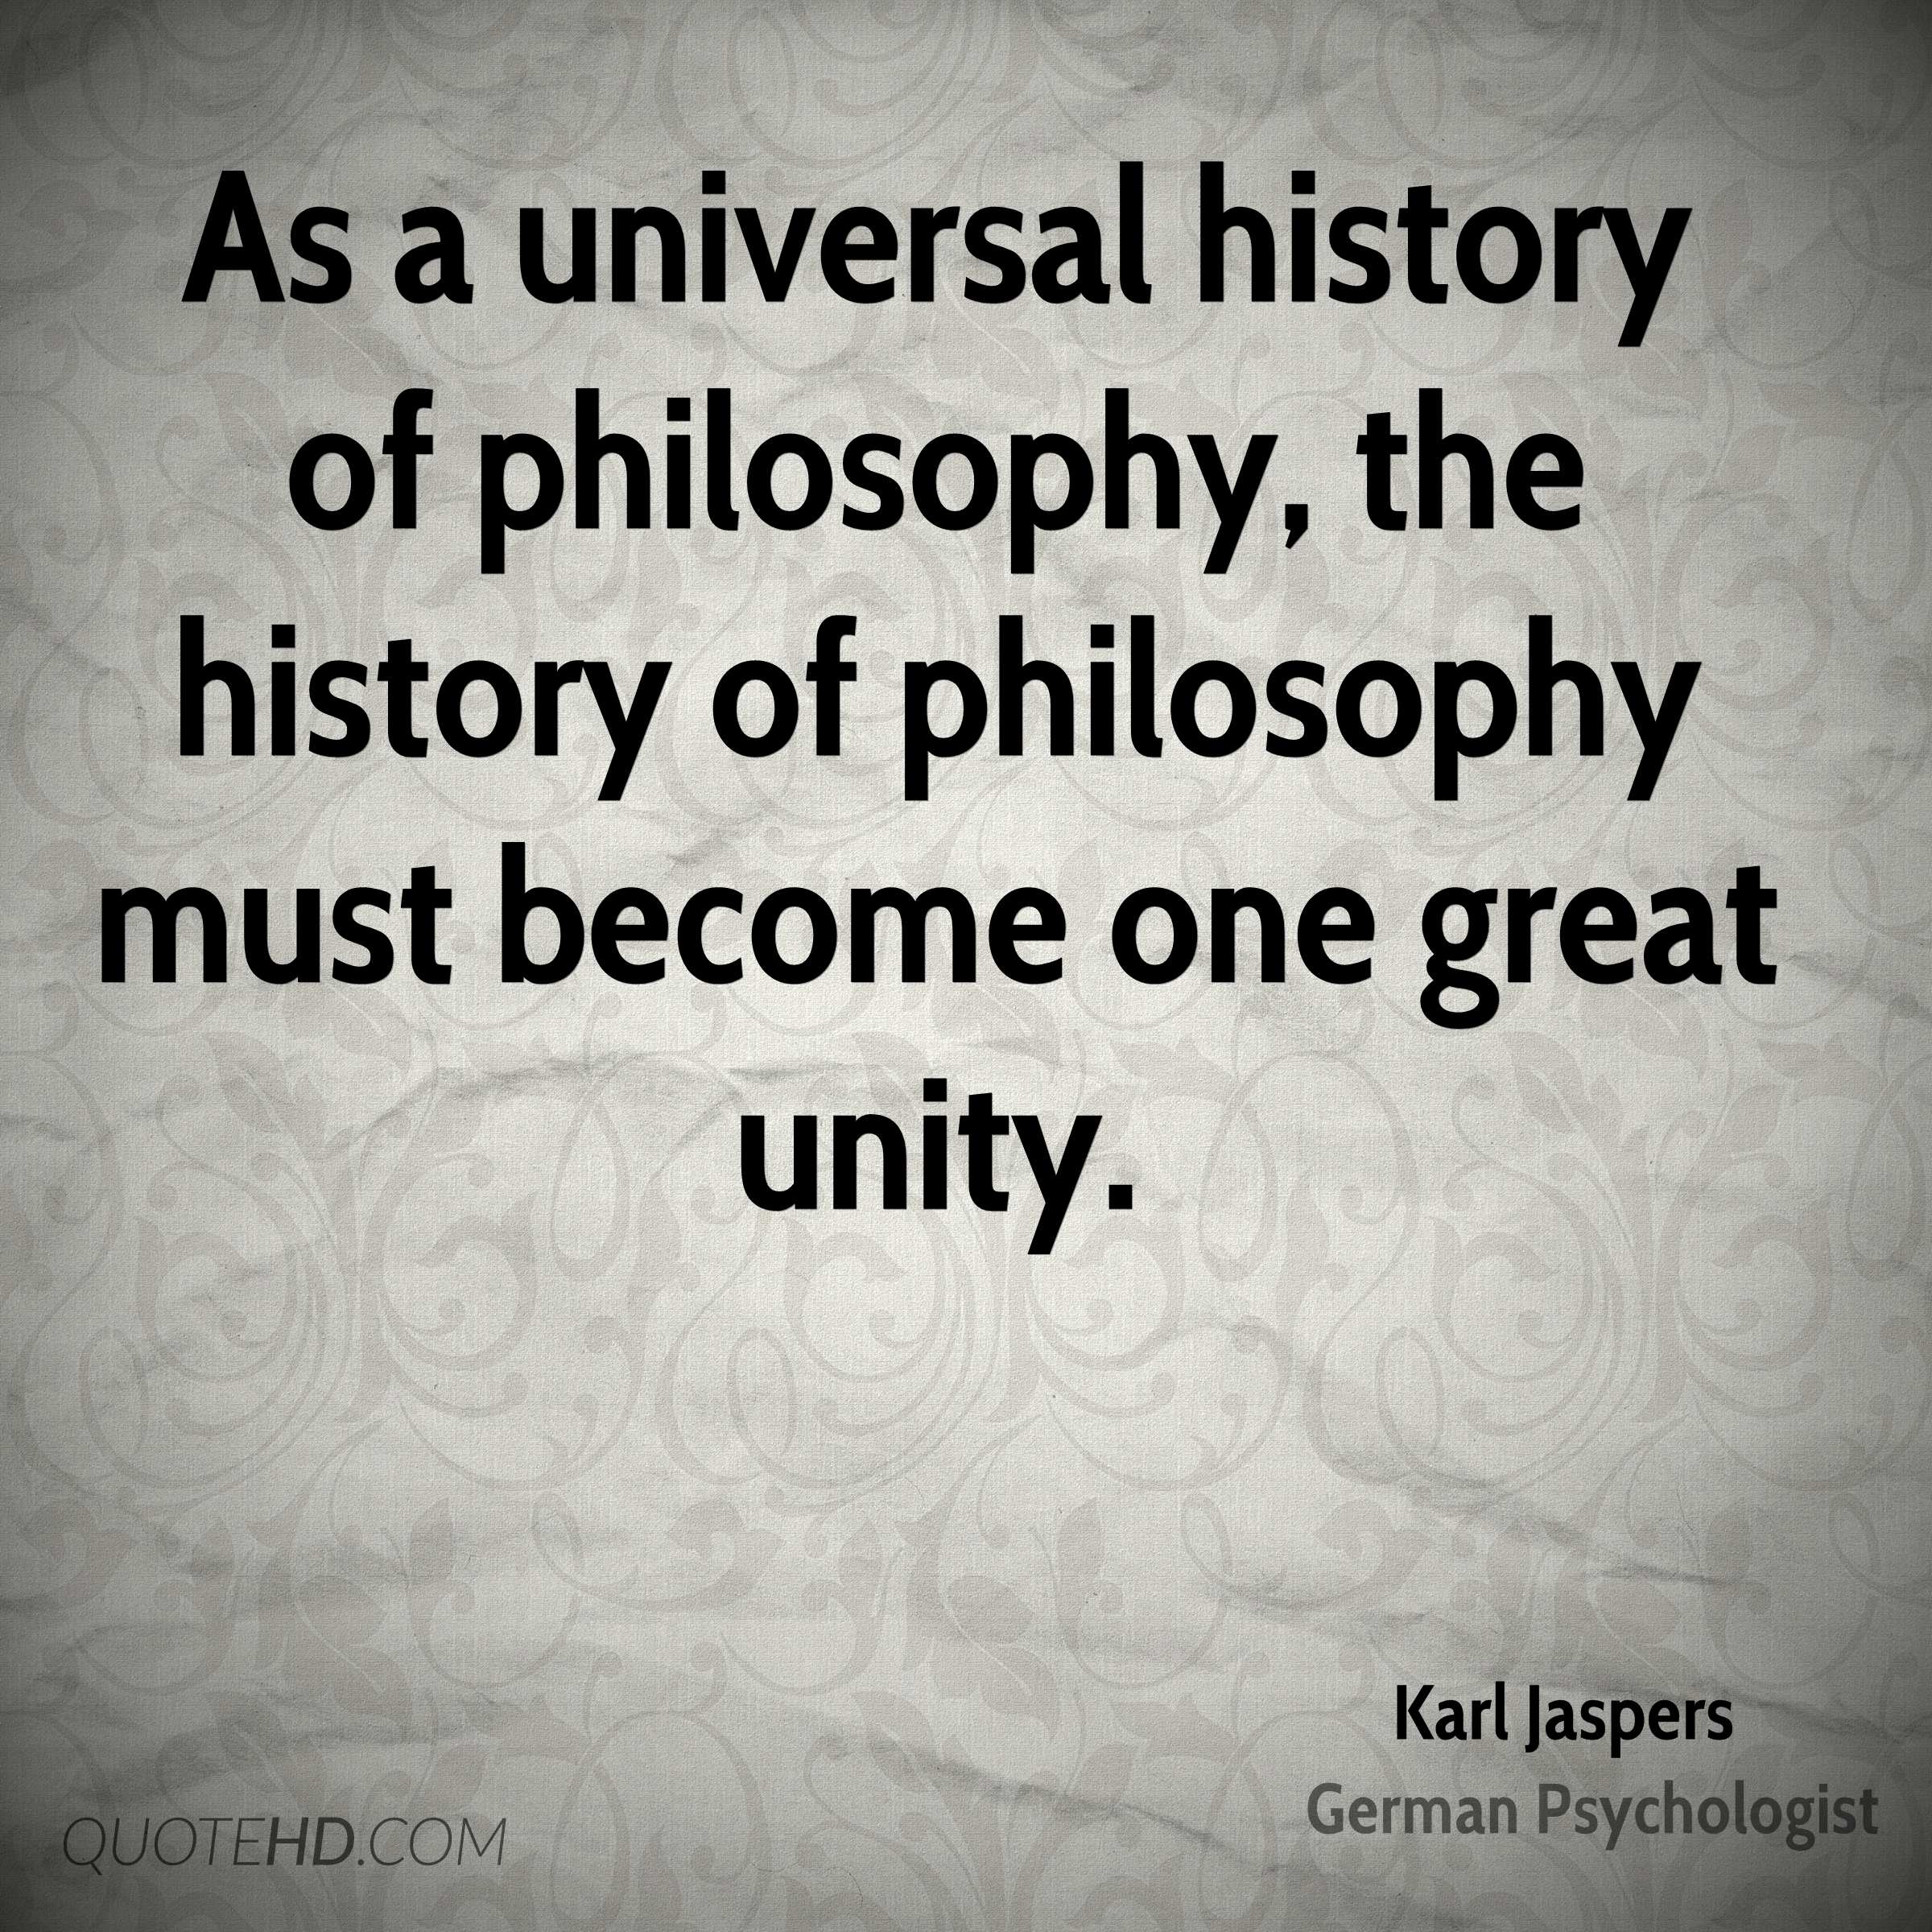 as a universal history of philosophy, the history of philosophy must become one great unity. karl jaspers